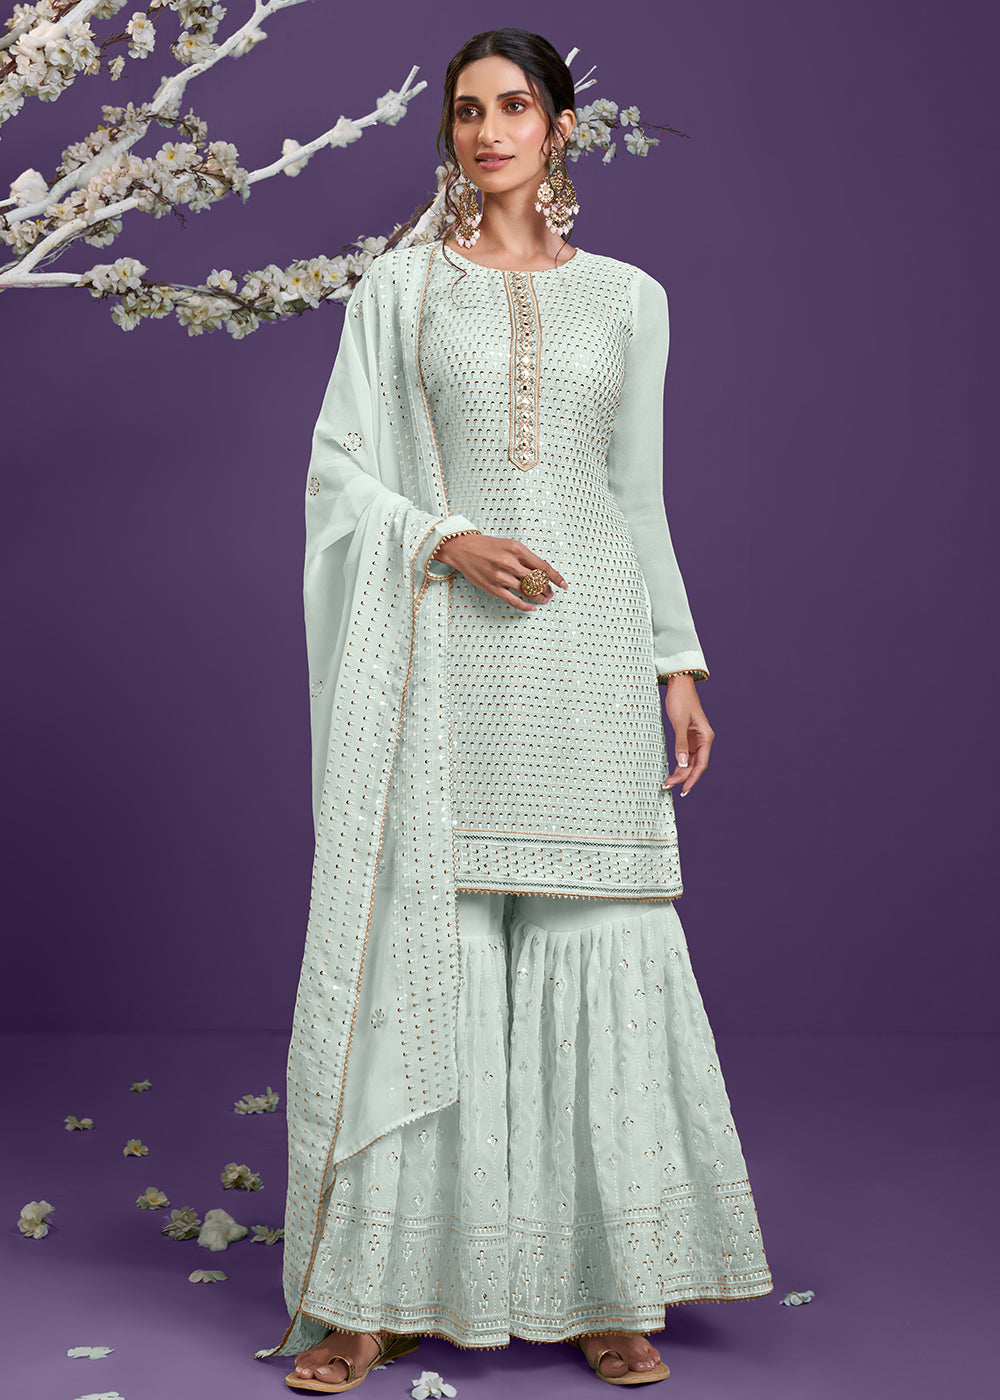 Shop Now Firozi Blue Khatli Work Embroidered Georgette Sharara Suit Online at Empress Clothing in USA, UK, Canada, Germany & Worldwide.